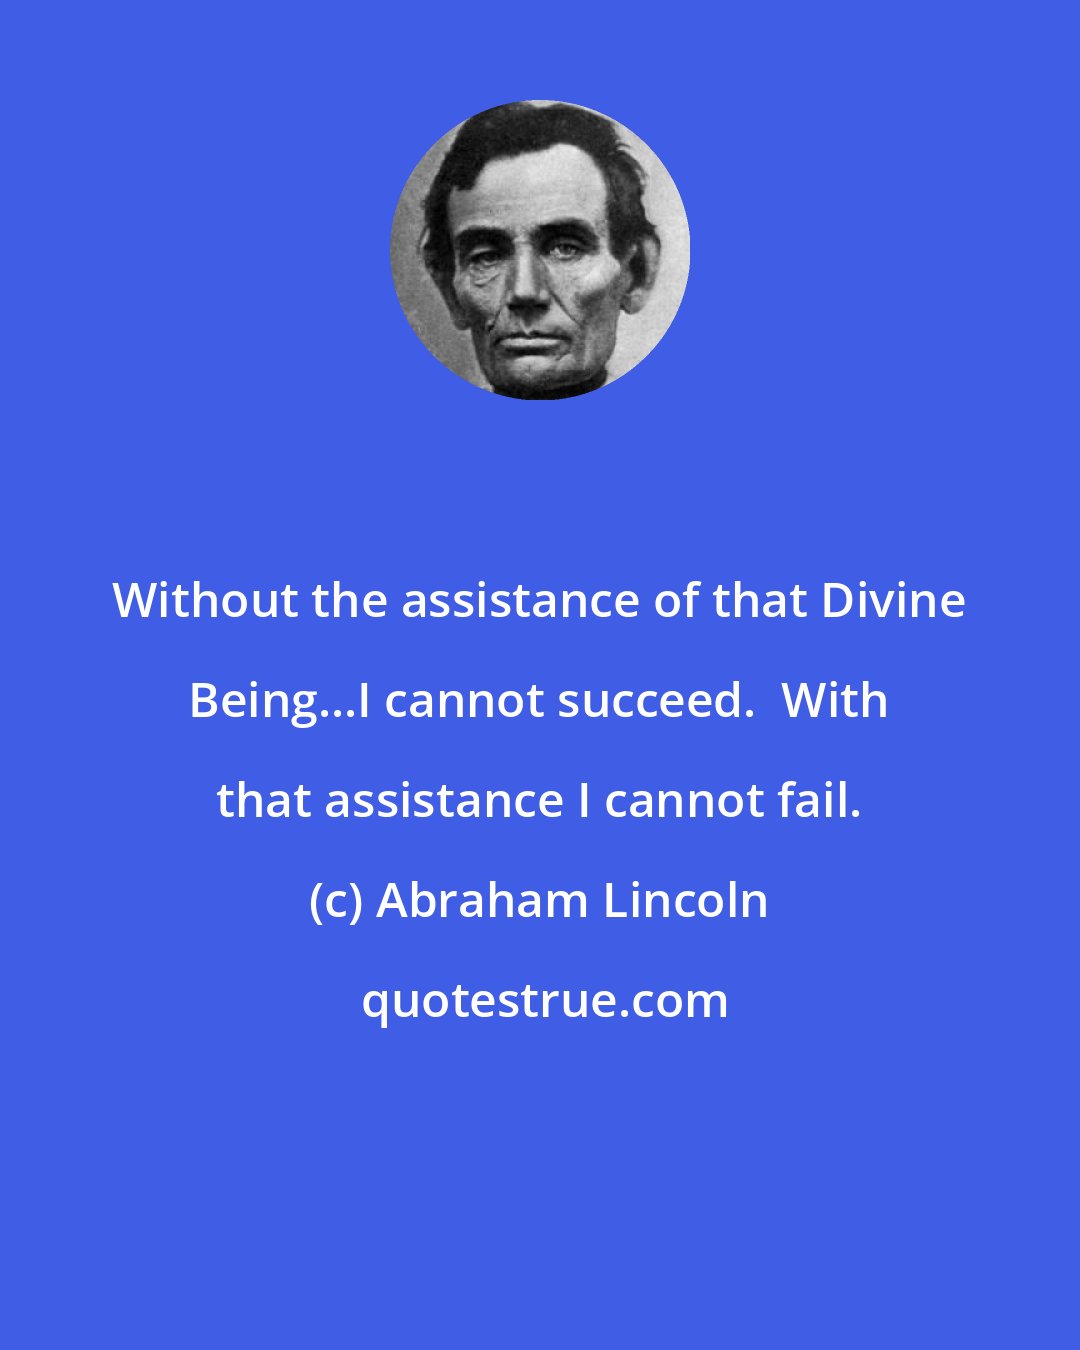 Abraham Lincoln: Without the assistance of that Divine Being...I cannot succeed.  With that assistance I cannot fail.